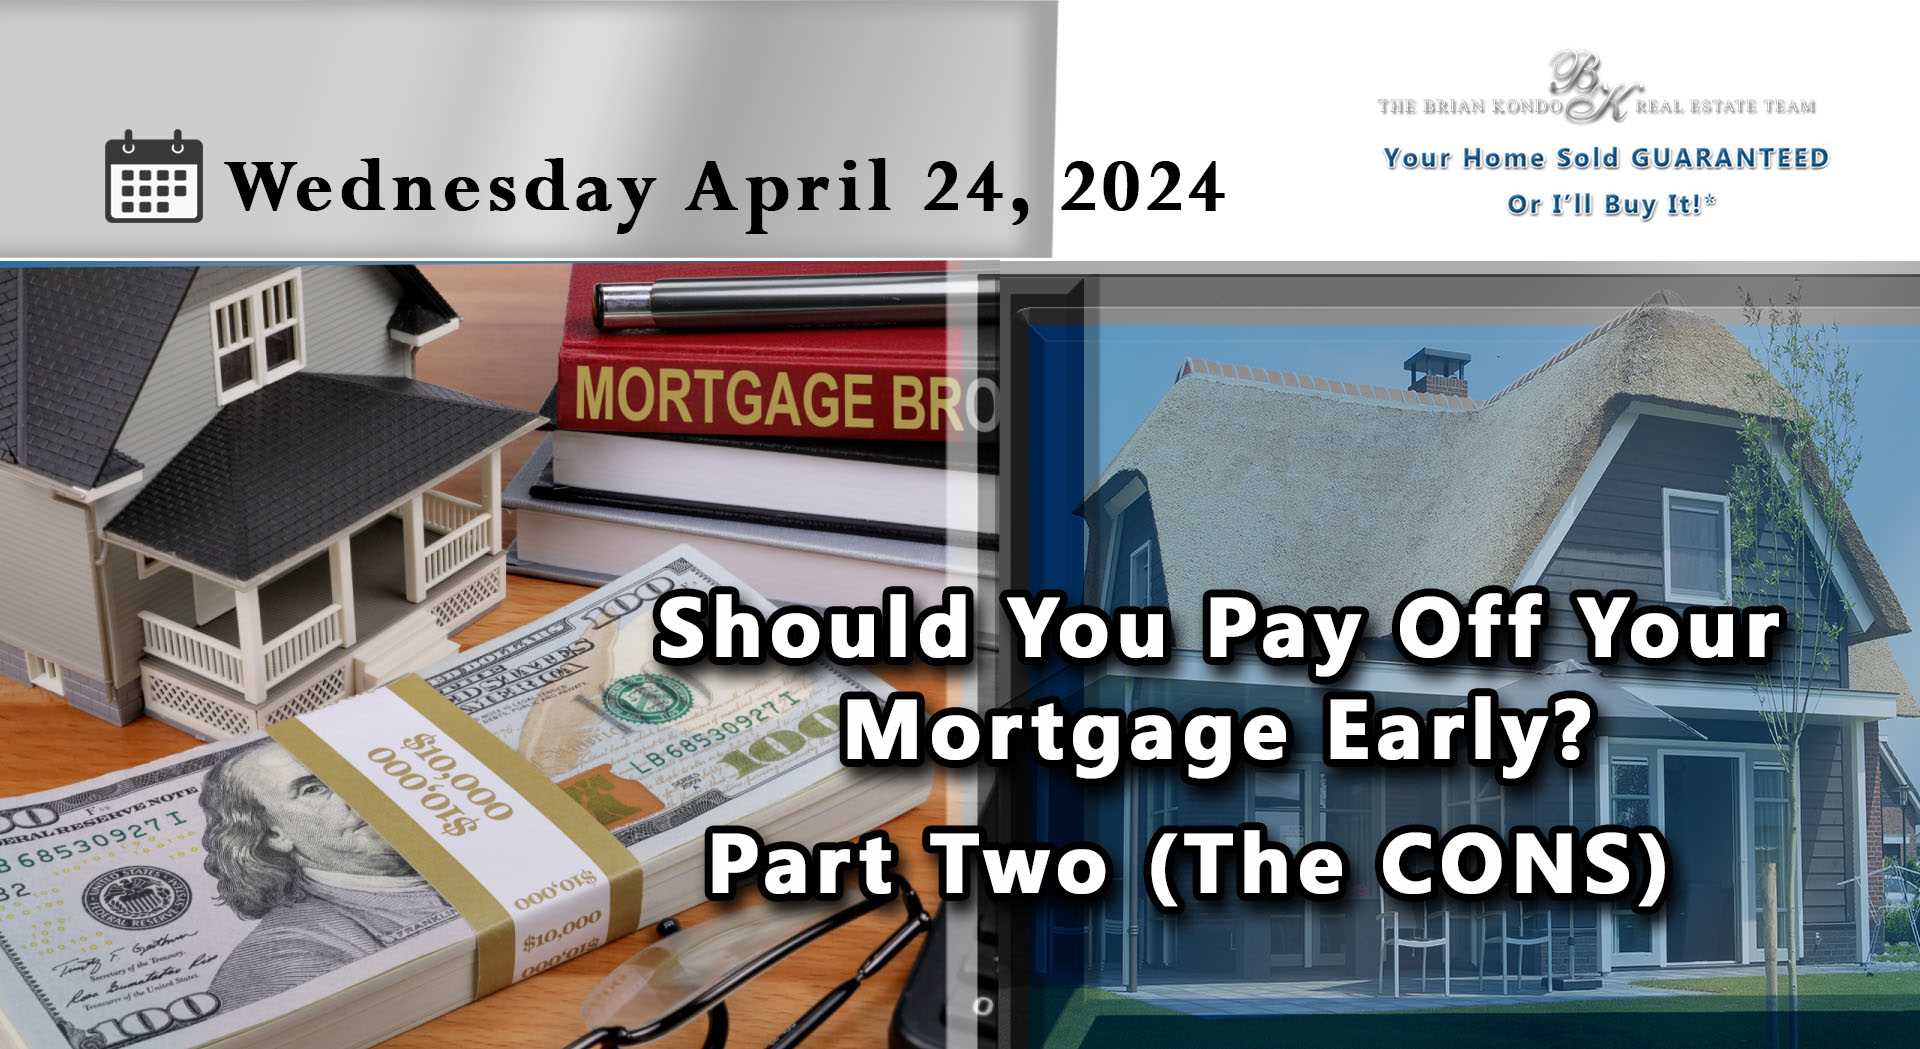 Should You Pay Off Your Mortgage Early? - Part Two (The CONS)